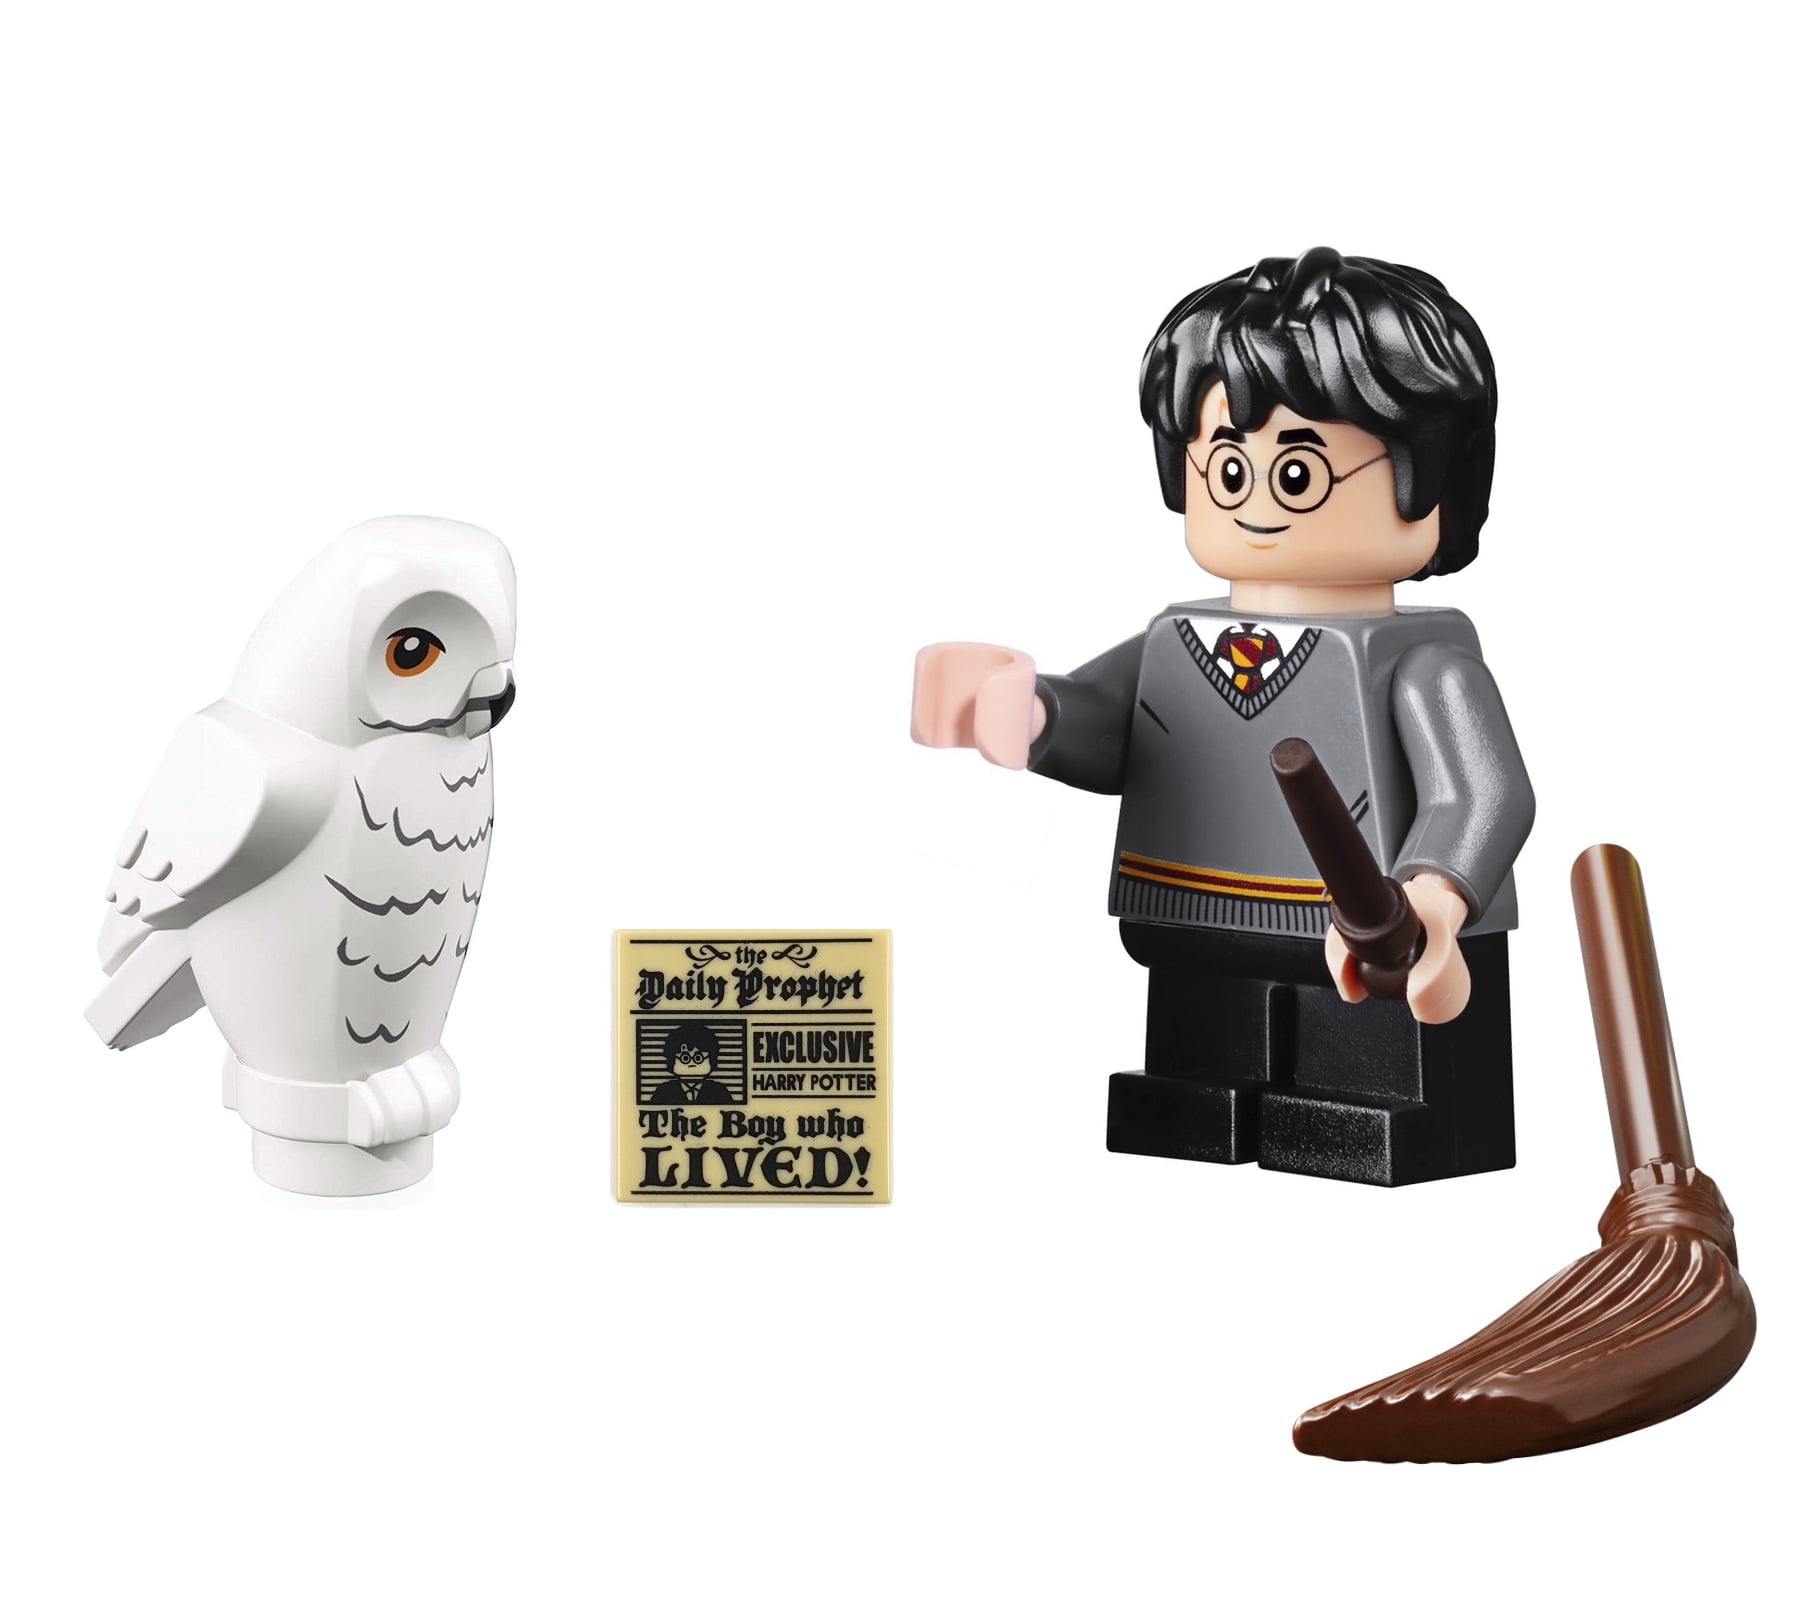 LEGO EXCLUSIVE HARRY POTTER The Daily Prophet Newspaper Tile The Boy Who Lived! 